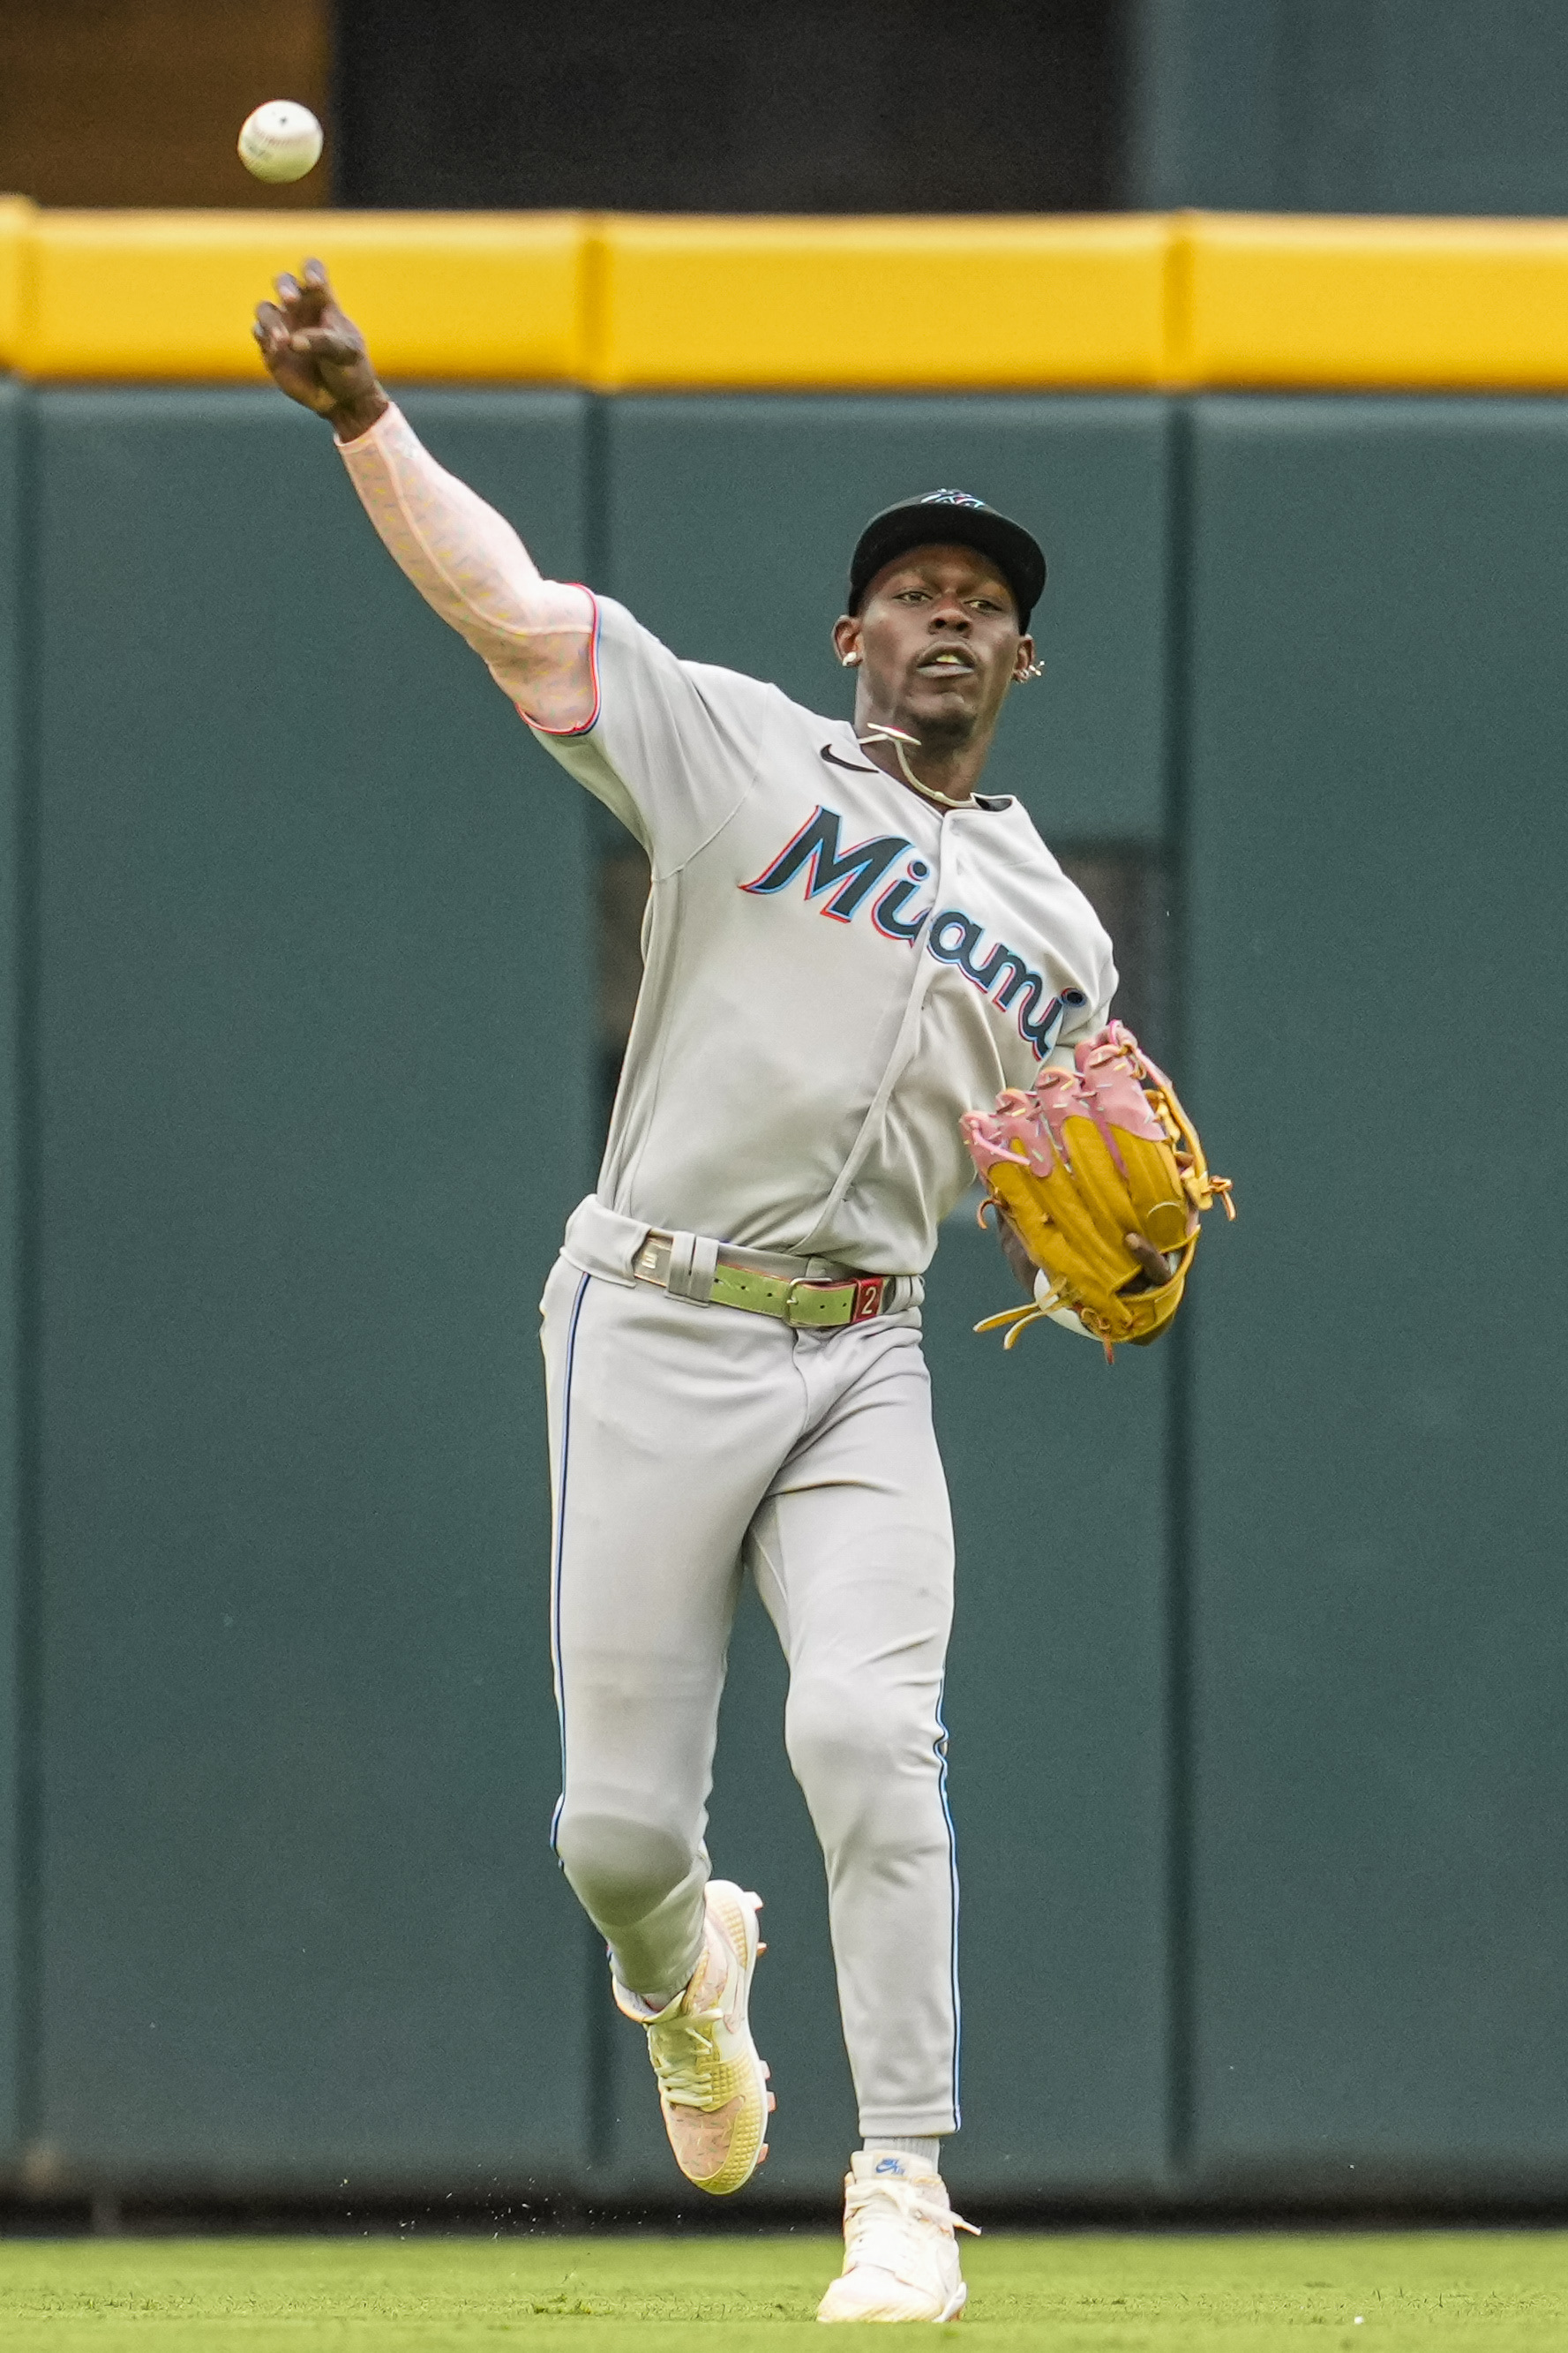 Newcomb, Camargo and Albies power Braves past Marlins 8-1